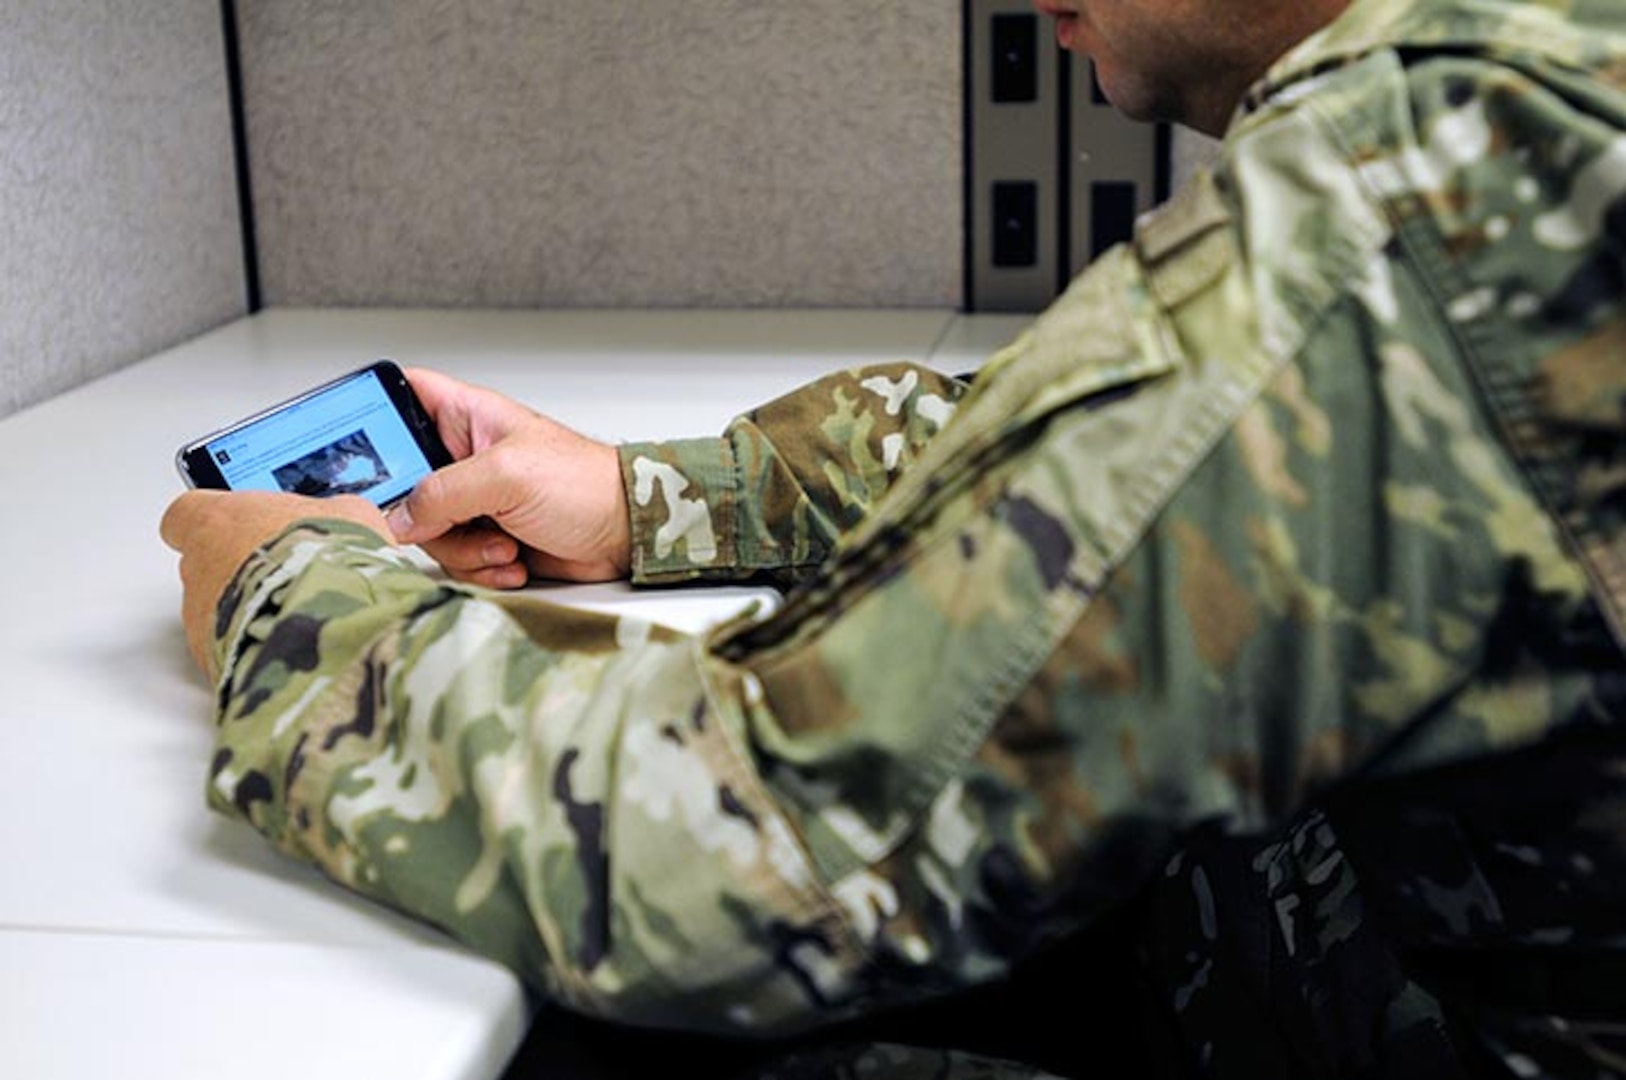 Harassment, bullying, hazing, stalking, discrimination, retaliation, and any type of misconduct that undermines dignity and respect – including that done online on social media platforms – will not be tolerated by the Army, said Maj. Gen. Jason Evans, director of Military Personnel Management, Army G-1, during a March 22 hearing on Capitol Hill.